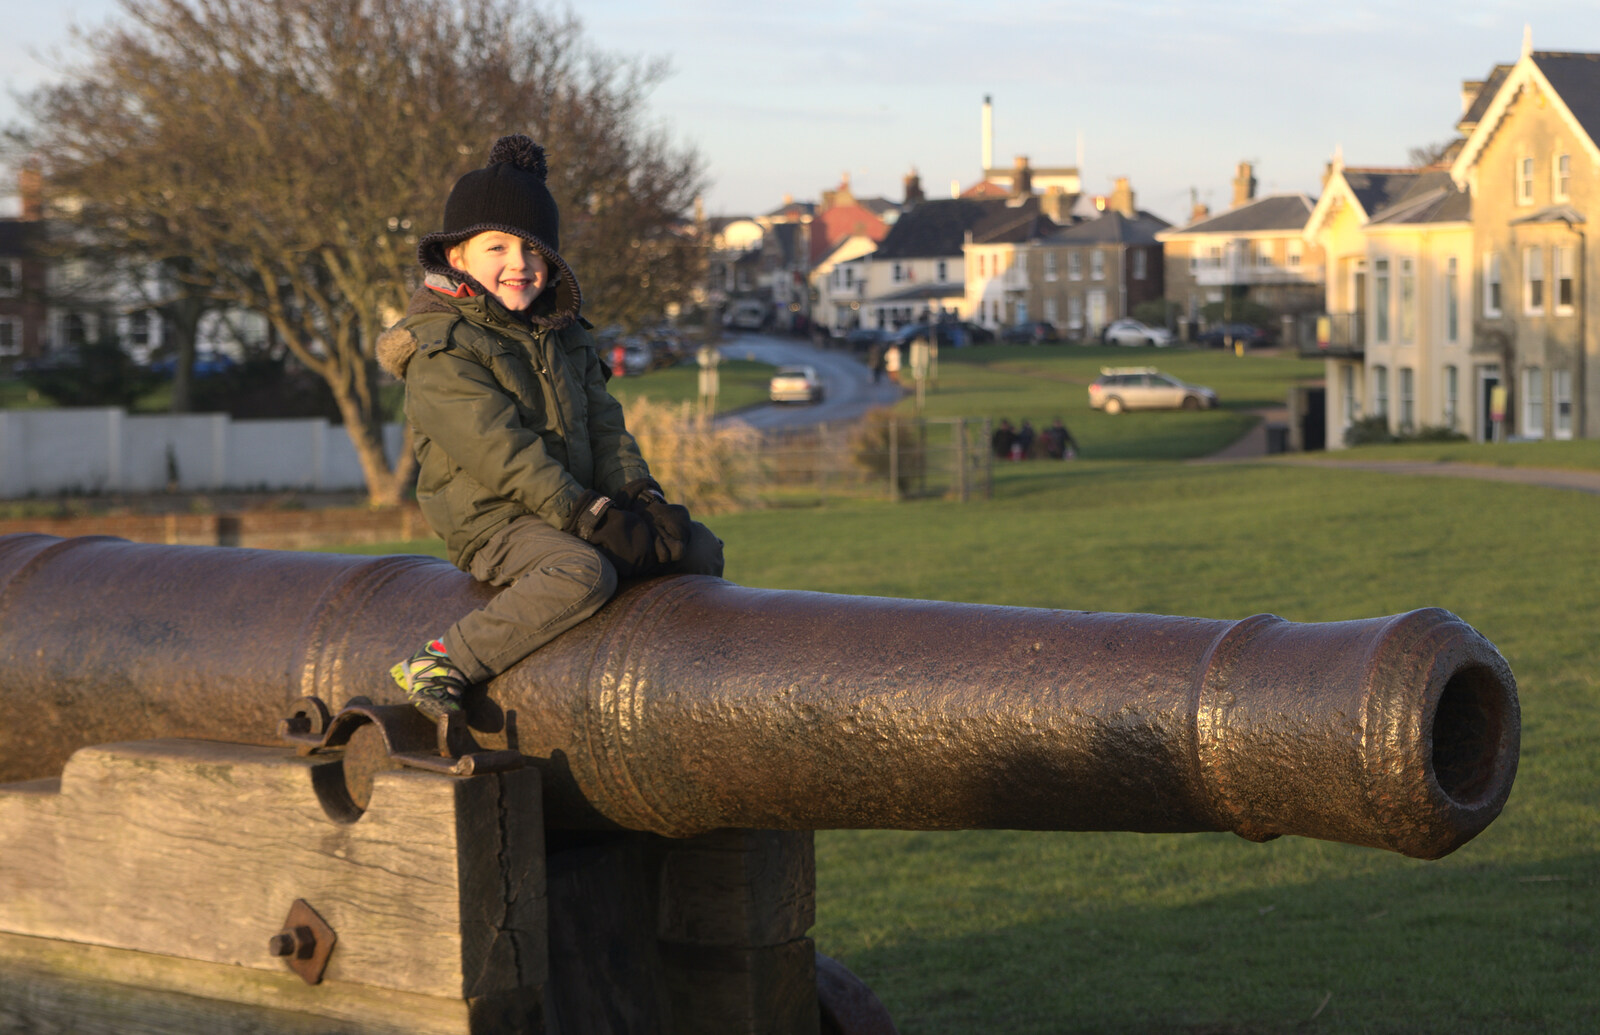 Fred's on a cannon from Sunset on the Beach, Southwold, Suffolk - 30th December 2014